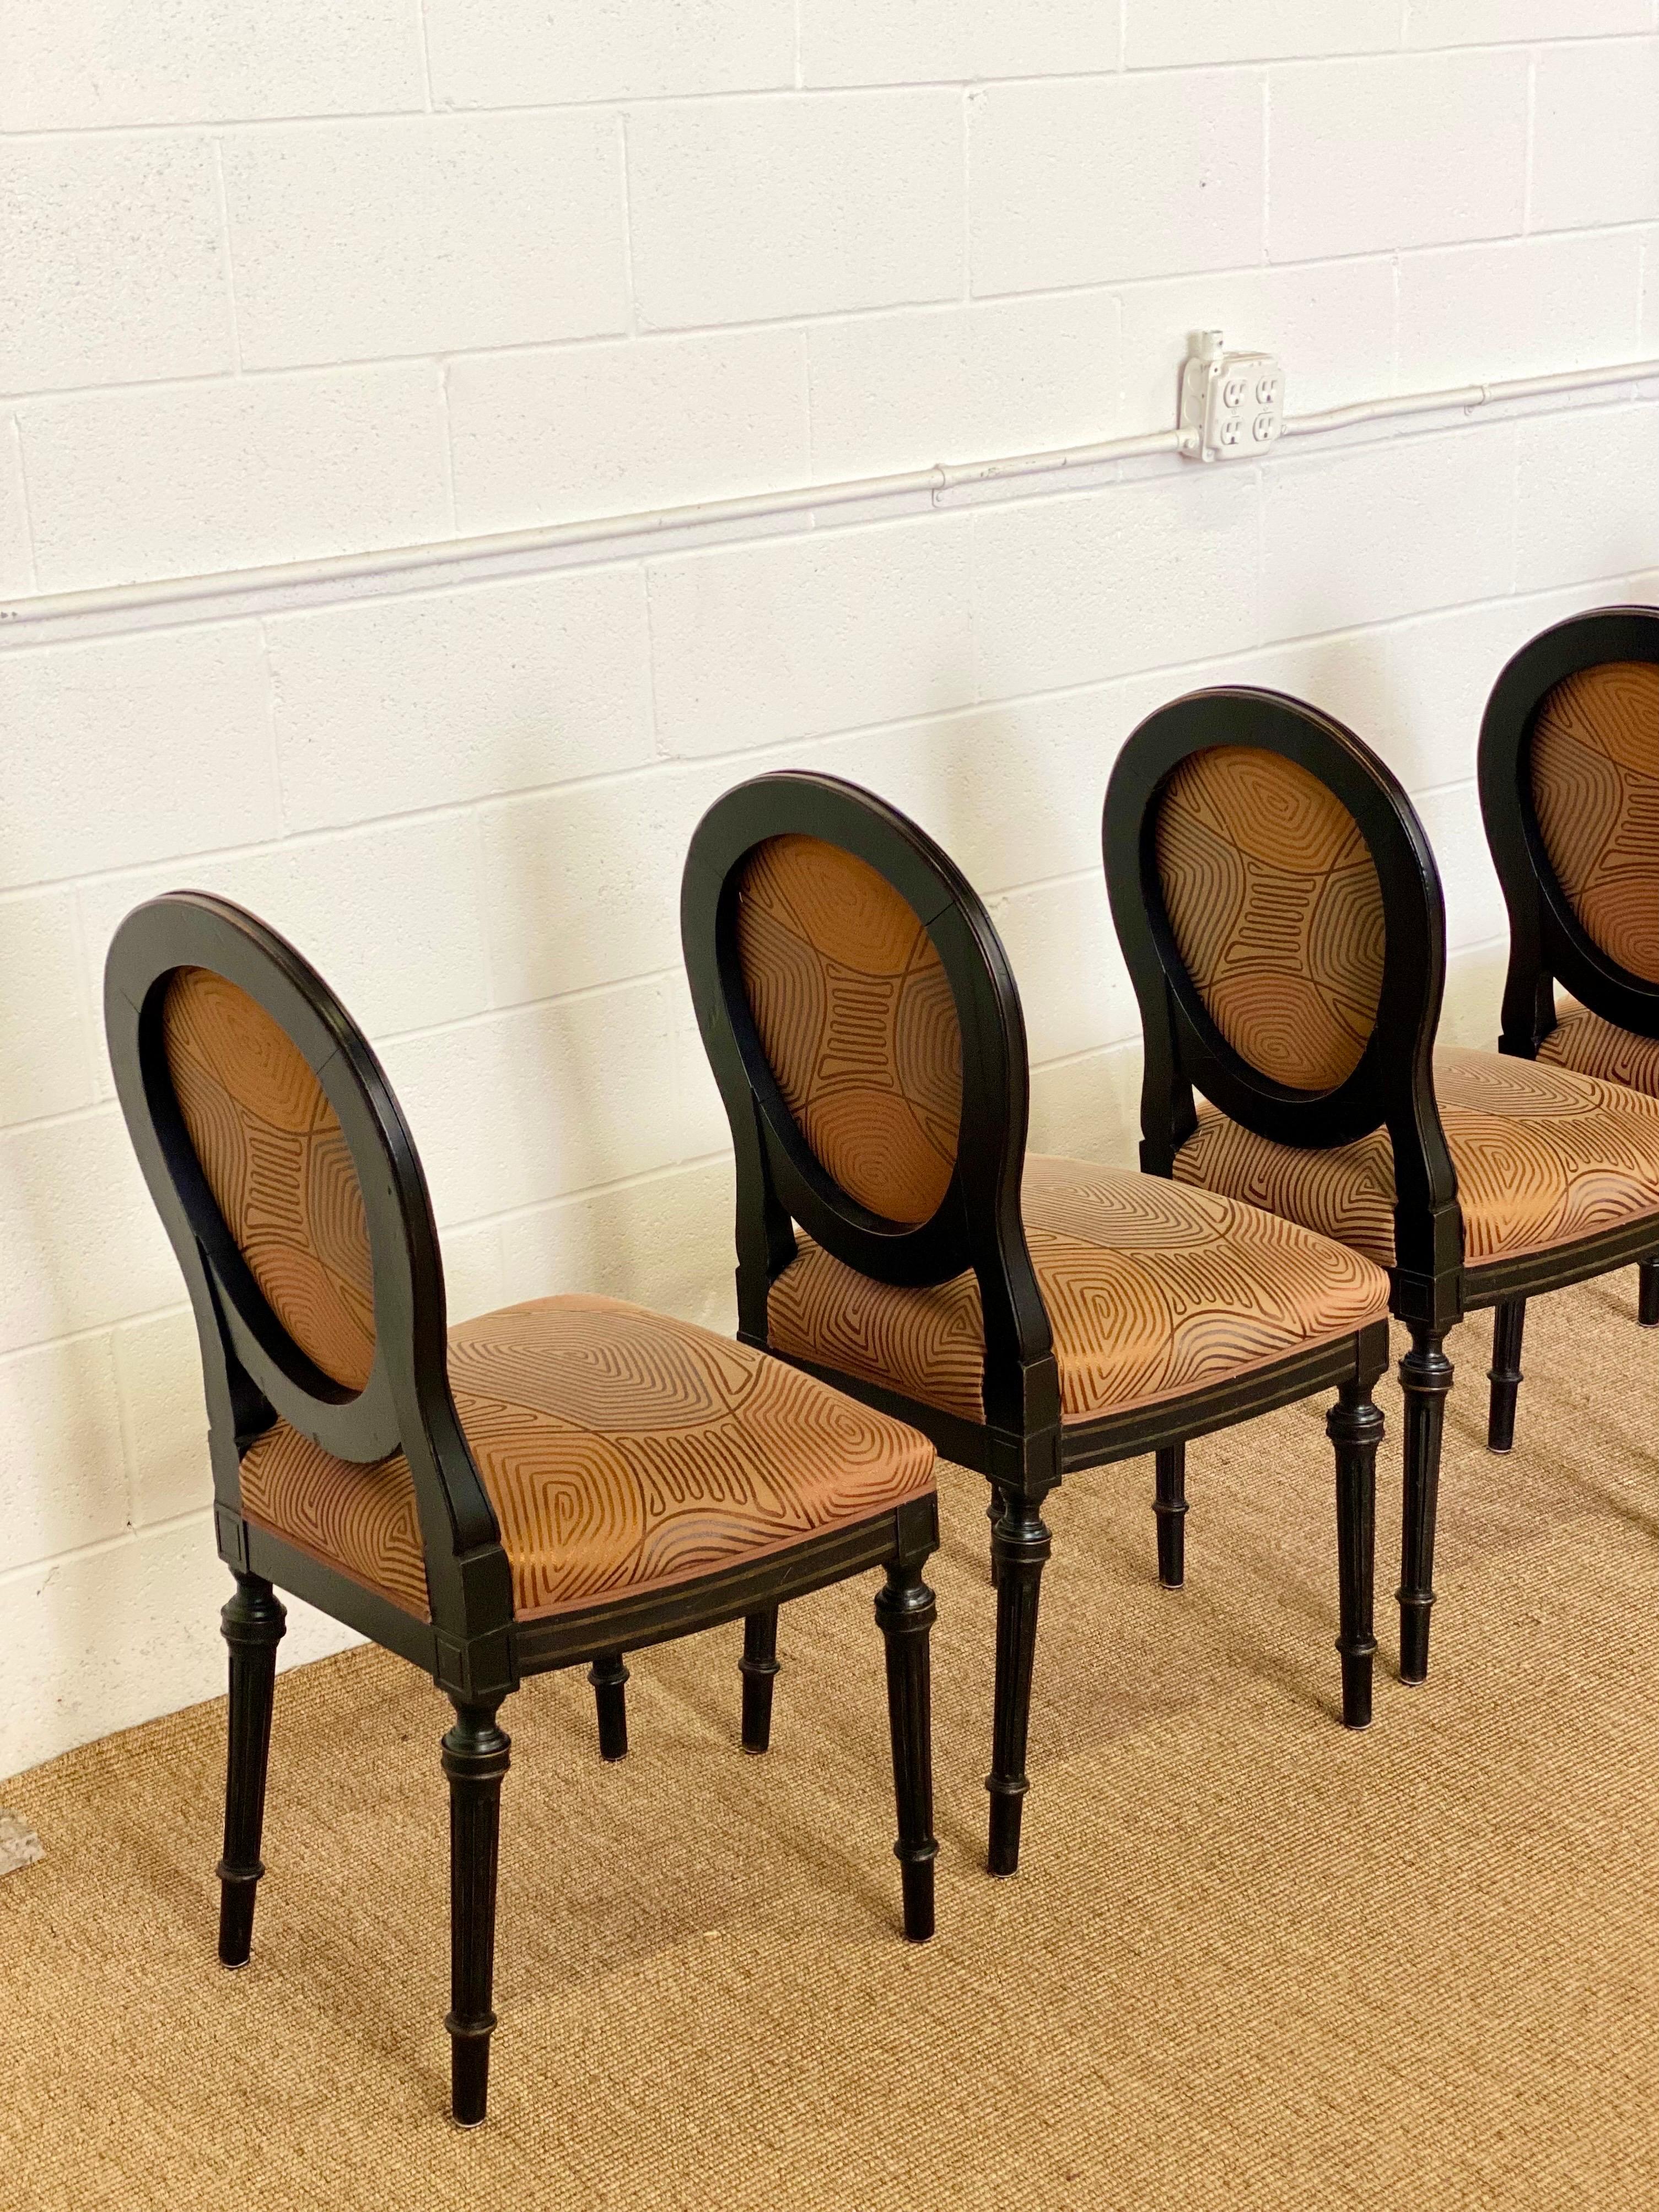 Early 20th Century Louis XVI Reupholstered Round Back Dining Chairs – Set of 6 For Sale 2